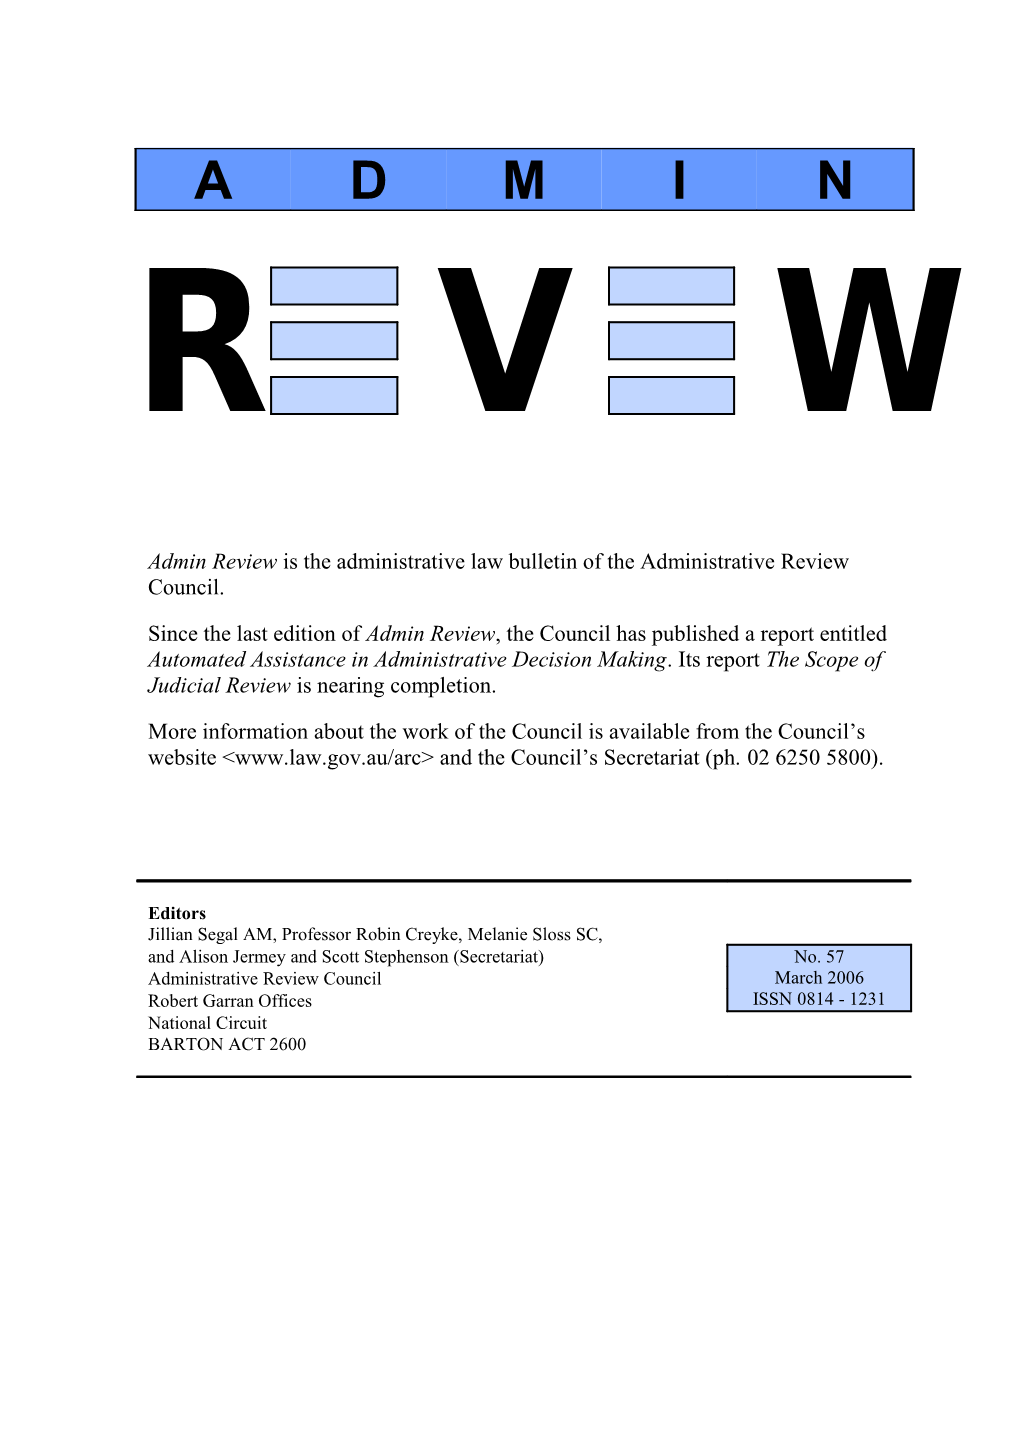 Admin Review Is the Administrative Law Bulletin of the Administrative Review Council